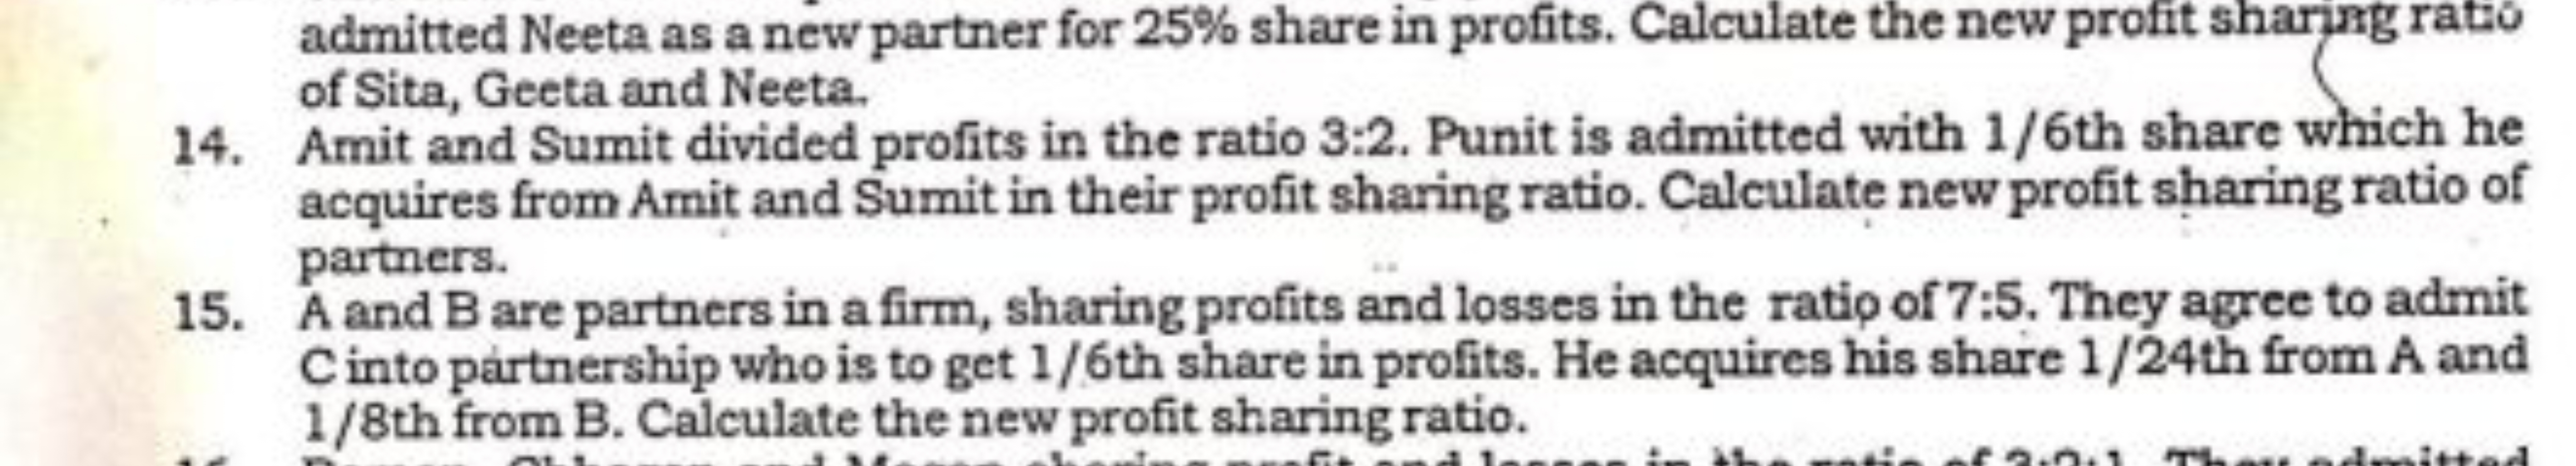 admitted Neeta as a new partner for 25% share in profits. Calculate th